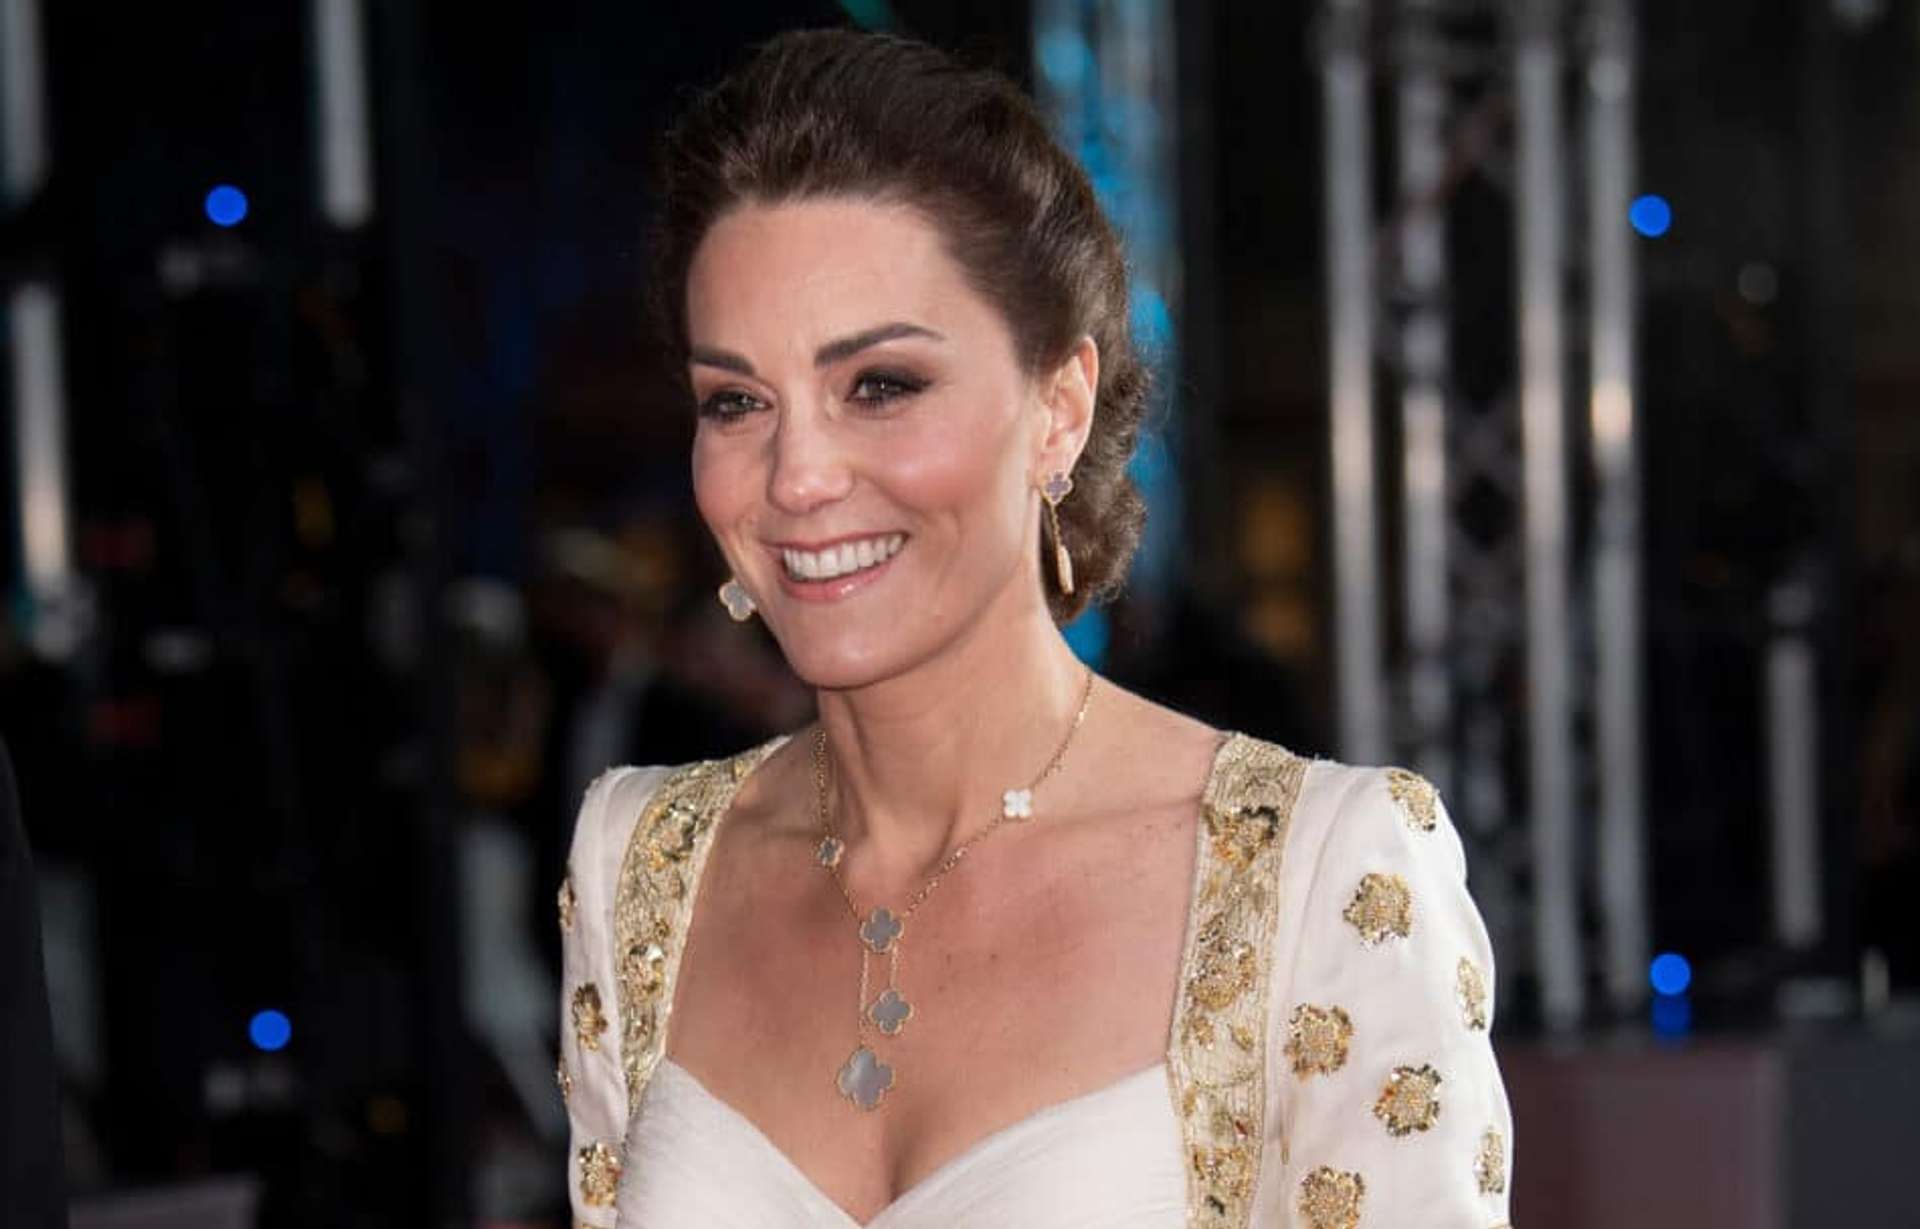 An image of Princess Catherine of Wales wearing a matching set of Van Cleef & Arpels Alhambra earrings and necklace.